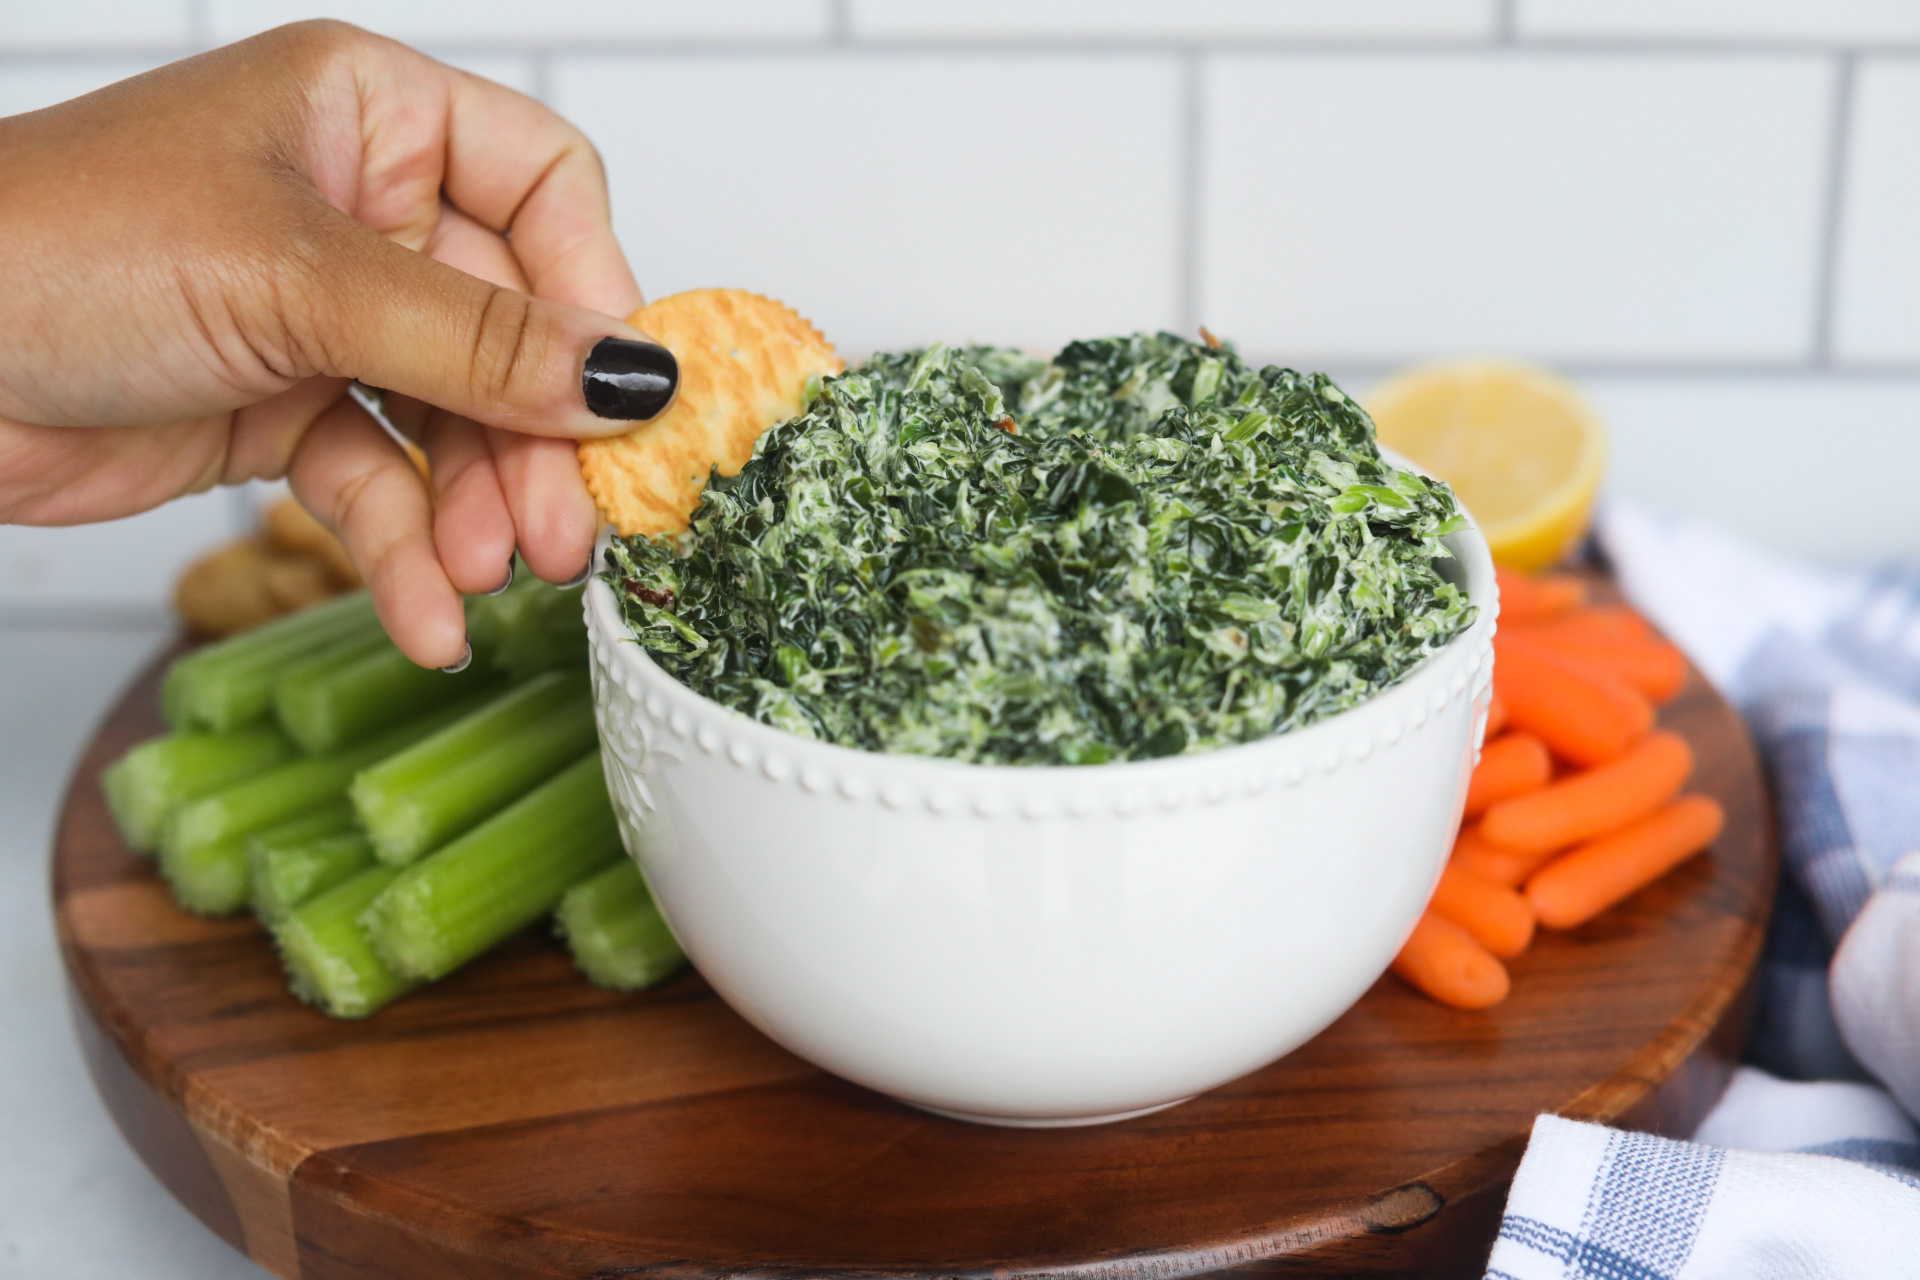 Hand dipping cold spinach dip with cracker out of the white bowl. Spinach dip is served on top of a wooden board with carrots, celery and crackers.